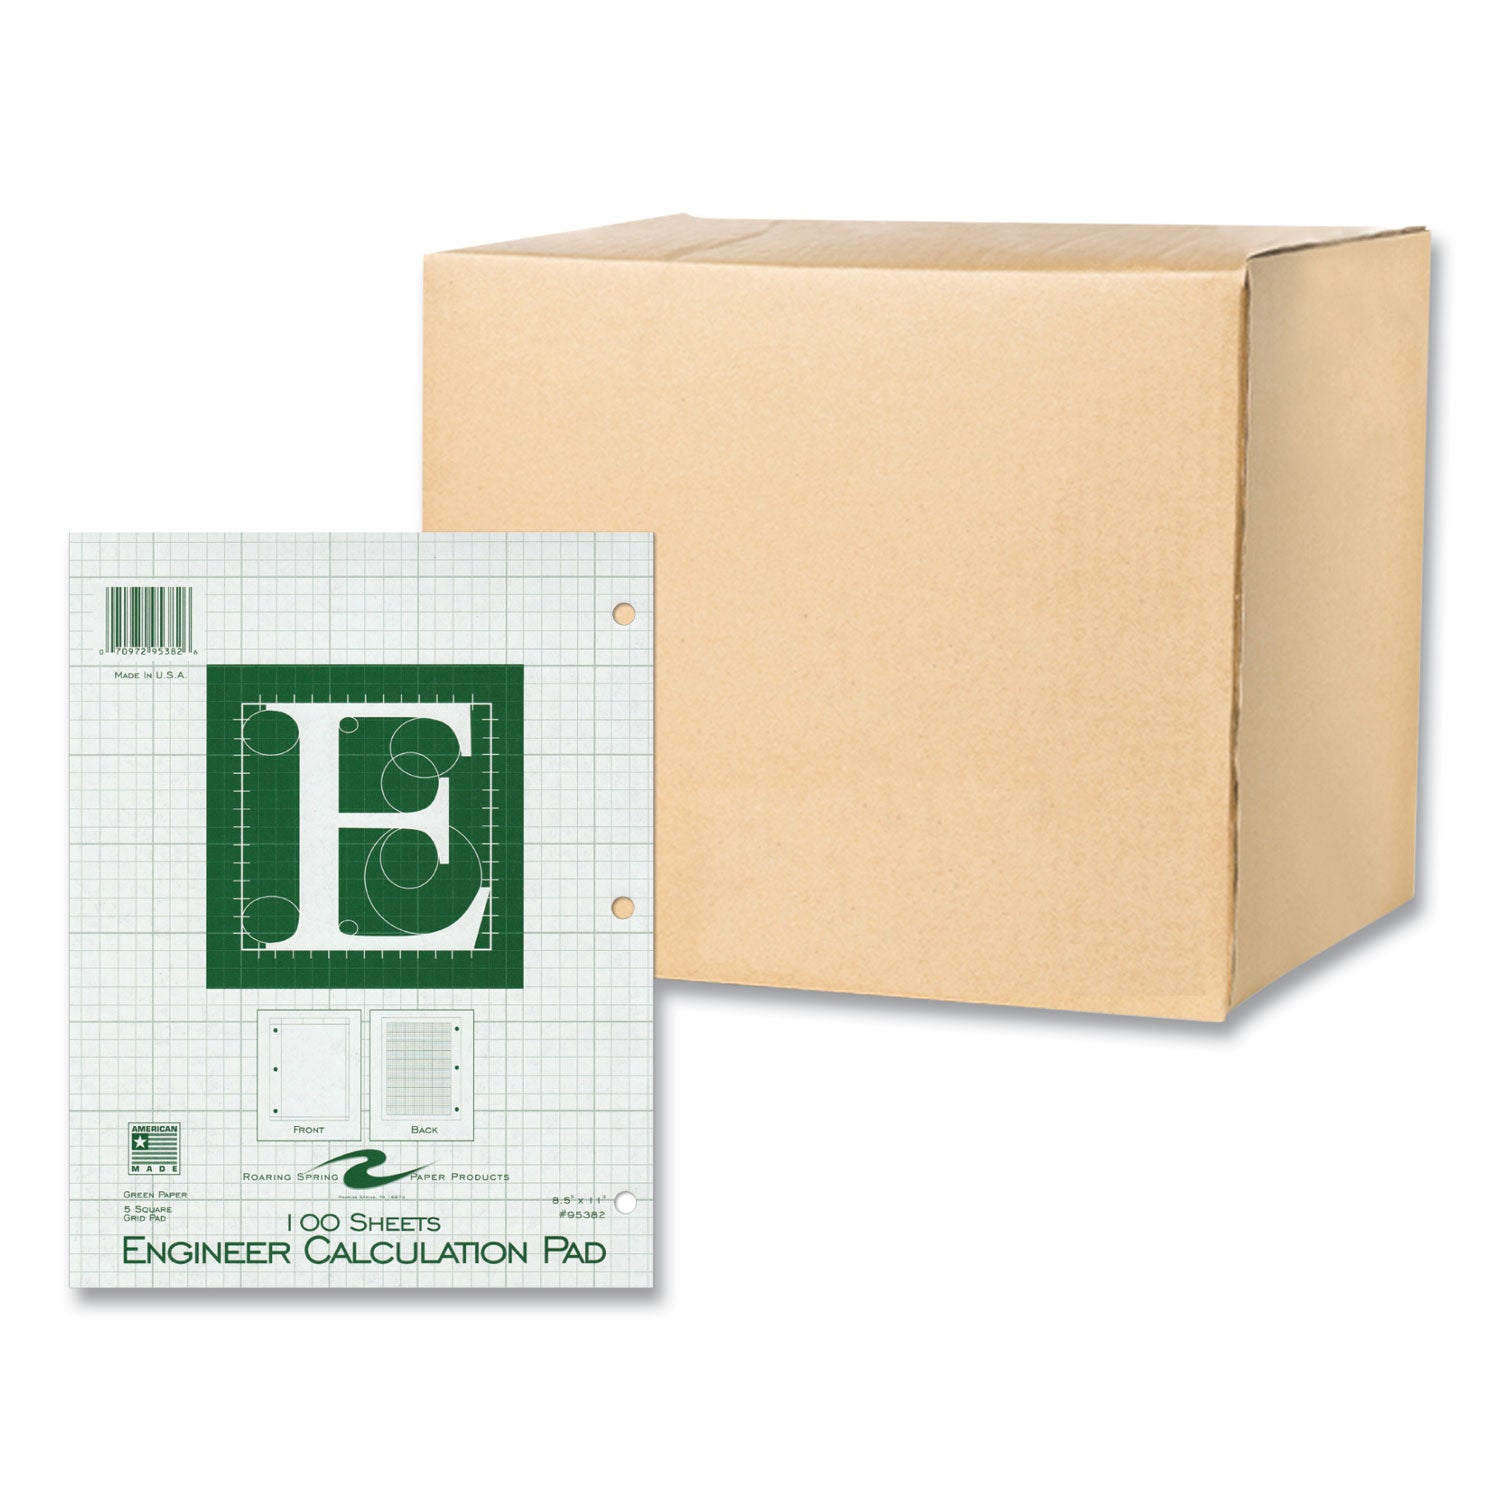 engineer-pad-05-margins-quad-rule-5-sq-in-1-sq-in-100-lt-green-85x11-sheets-pad-24-ct-ships-in-4-6-business-days_roa95382cs - 1